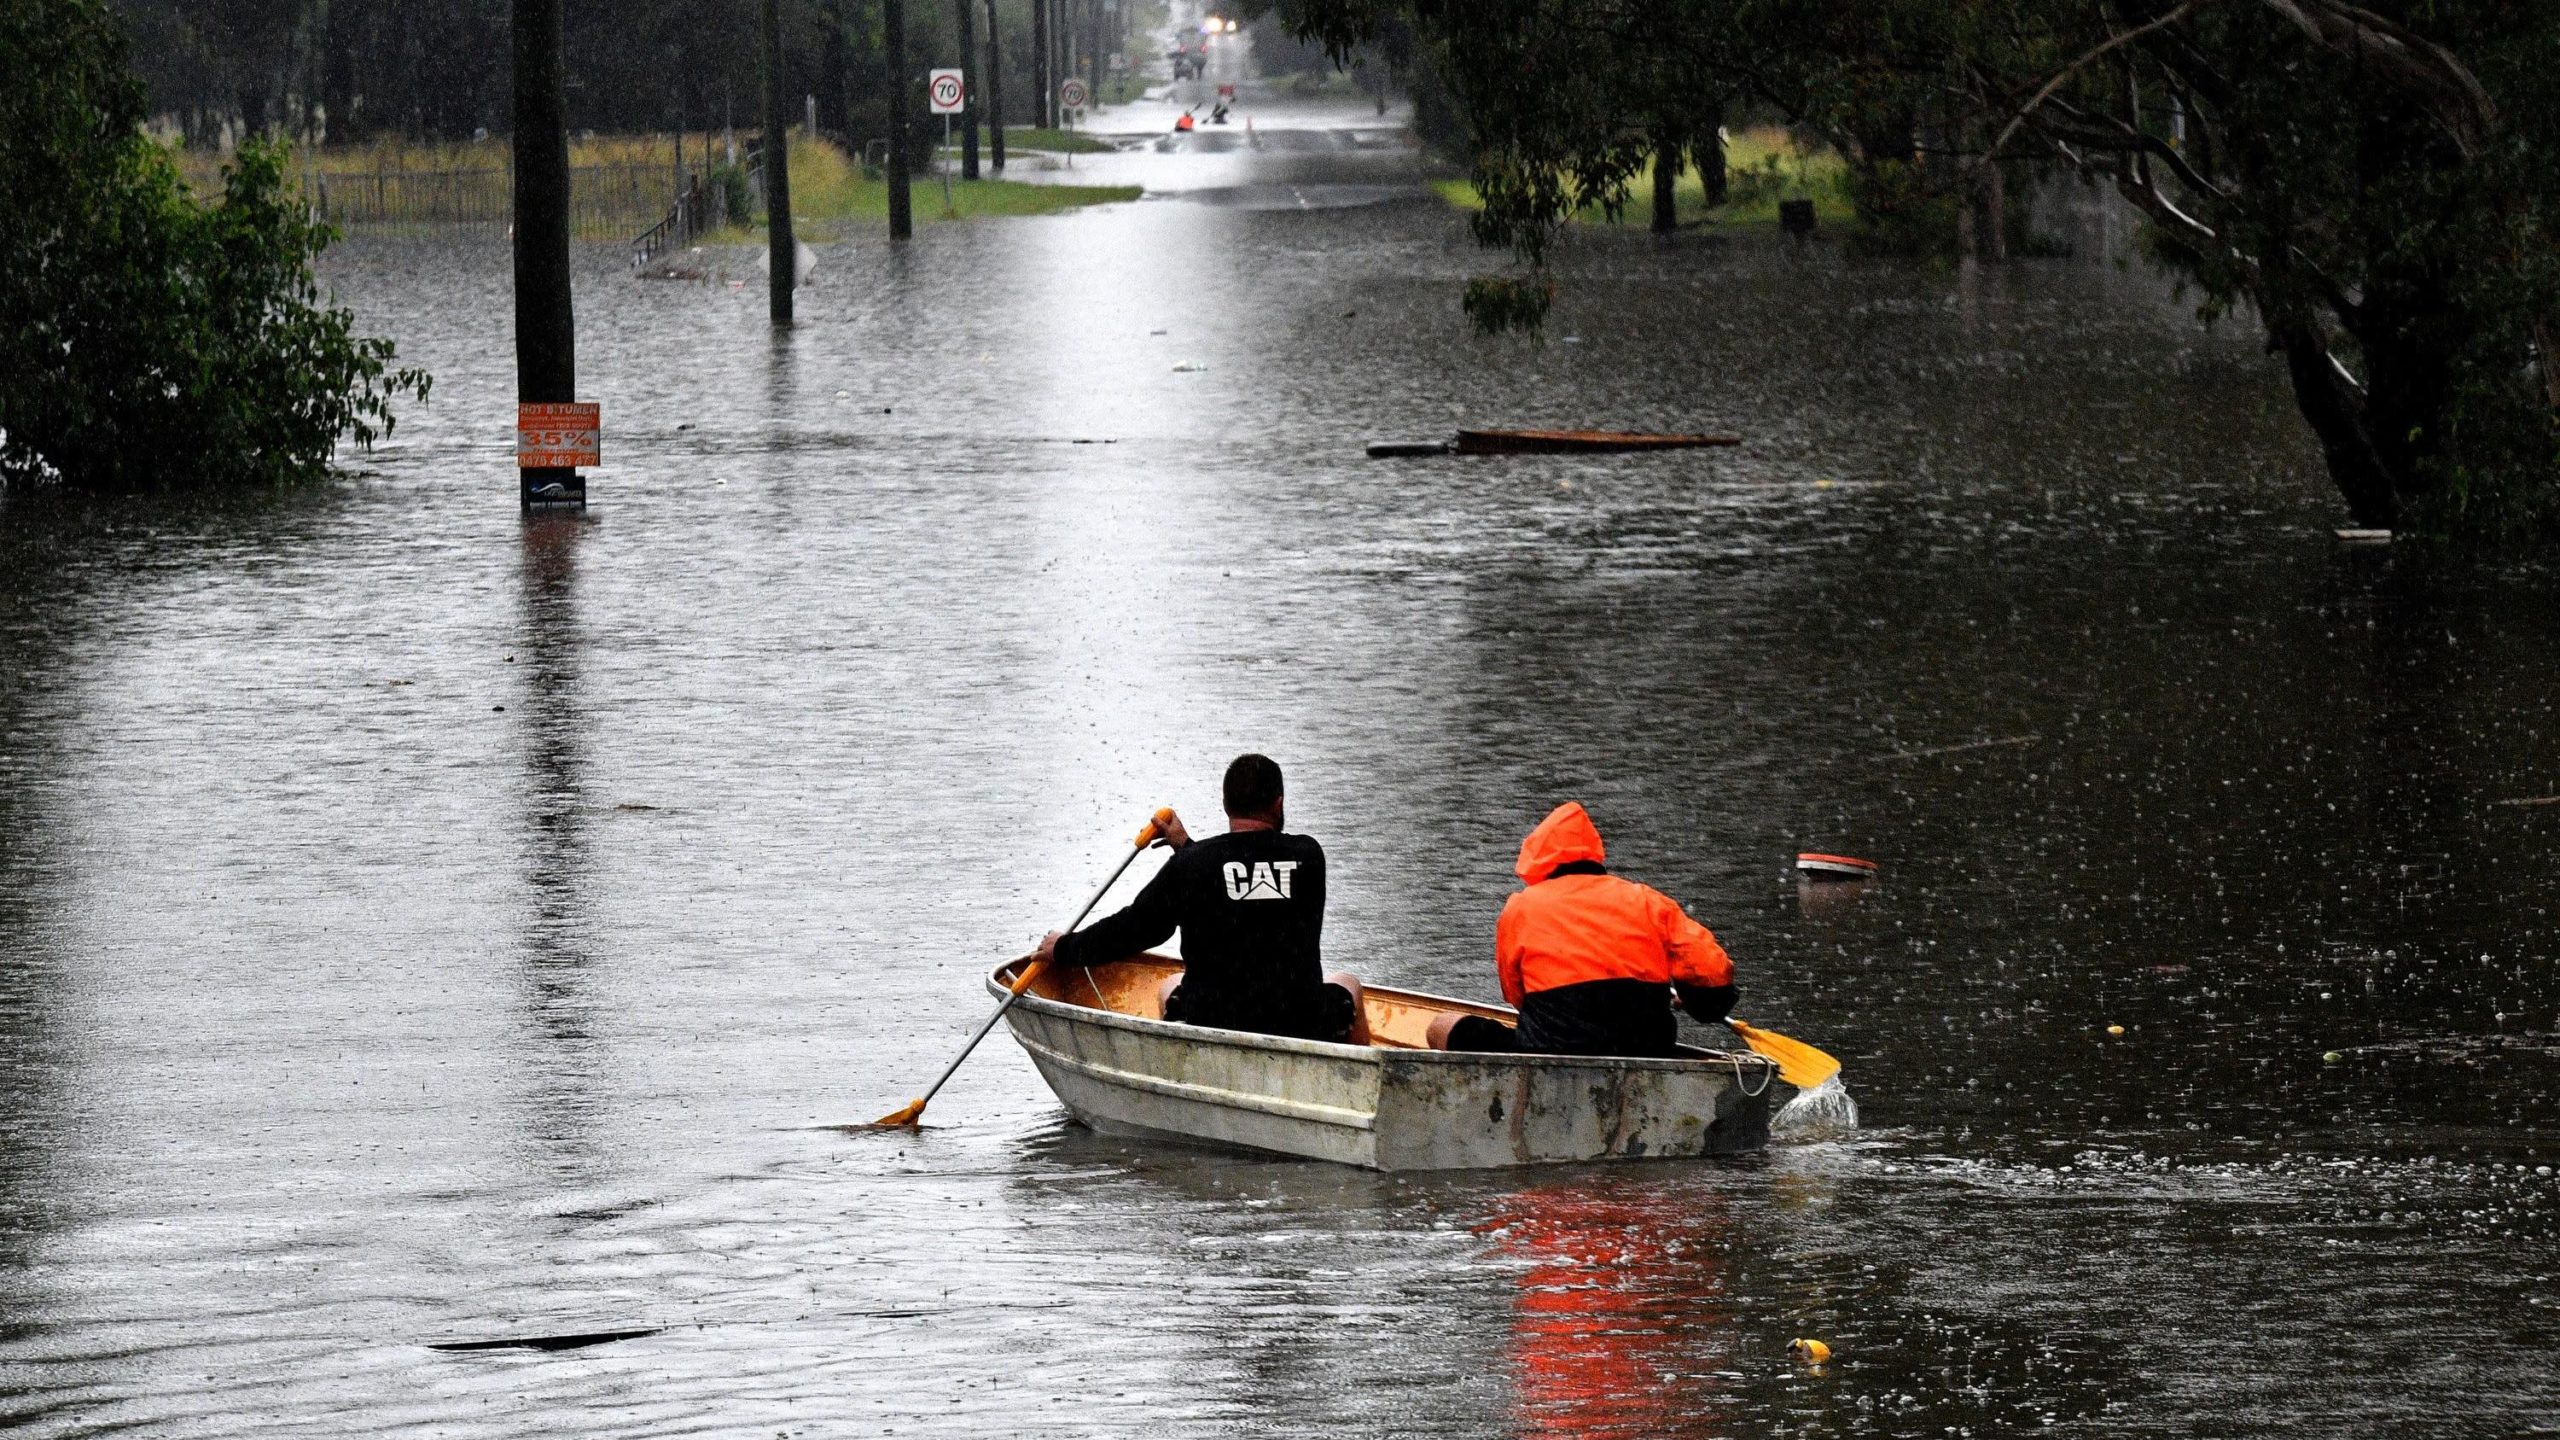 Residents commute on a boat in a flooded residential area near Windsor, Australia. (Photo: Saeed Khan/AFP, Getty Images)